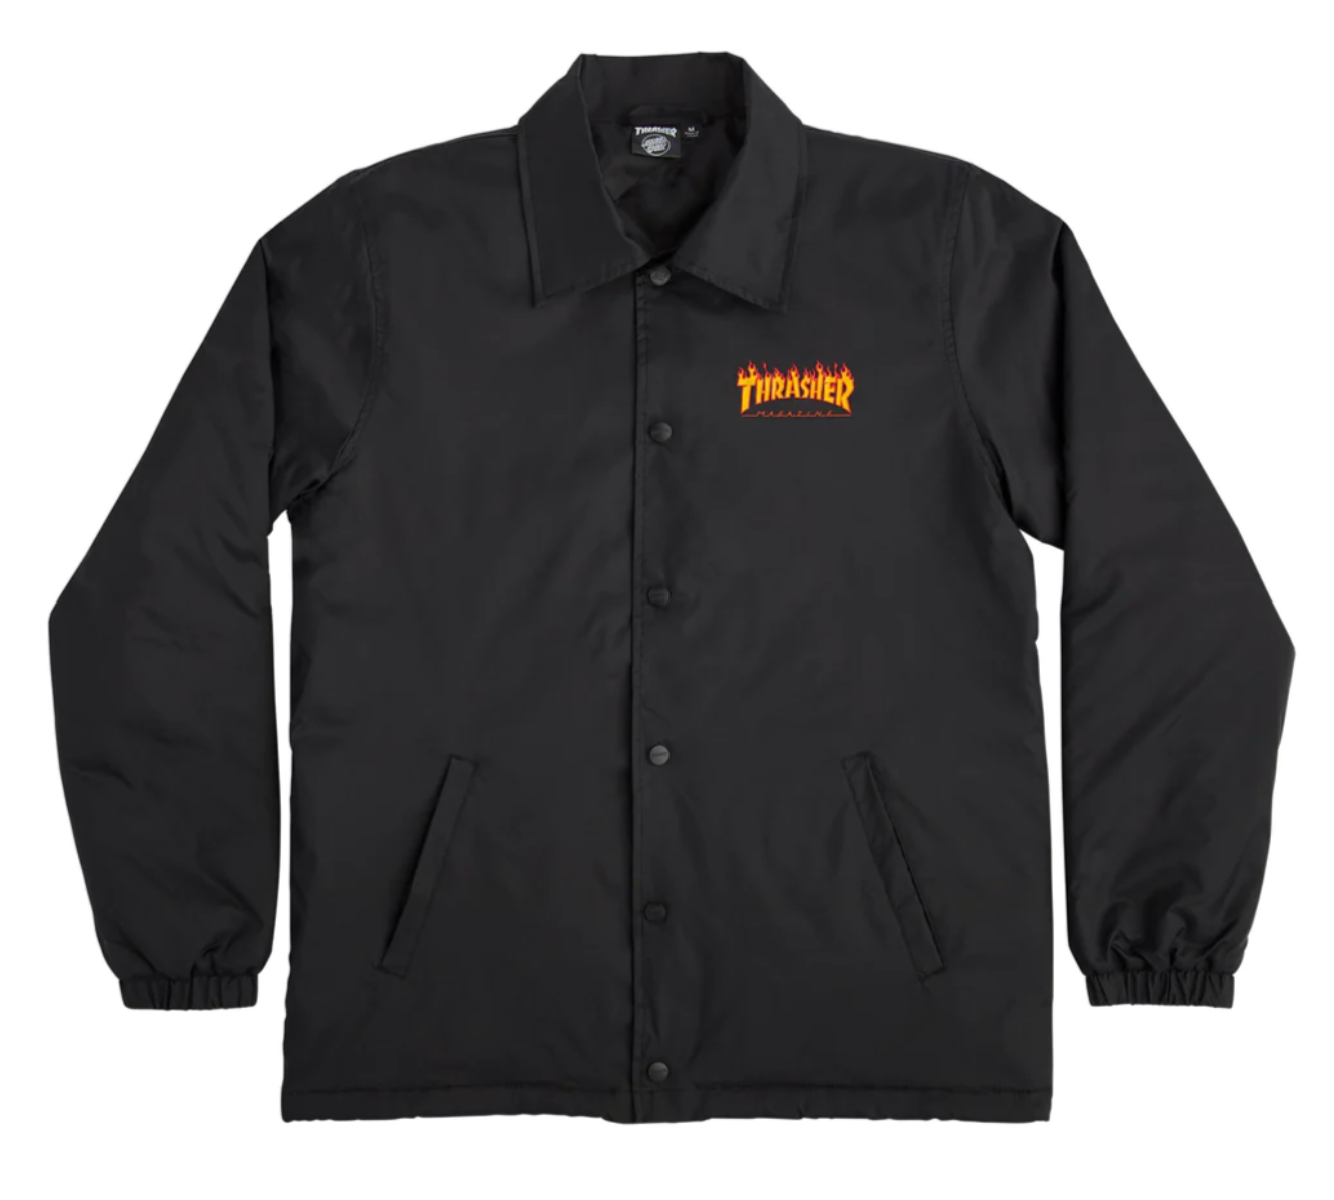 Thrasher links up with Santa Cruz Skateboards to drop one the most firing collaborations of the year. COTY? The new Thrasher Flame Dot men's custom, regular fit coach jacket features diamond quilted lining, custom Santa Cruz and Thrasher snaps, drawcord pulls at bottom opening and Santa Cruz x Thrasher Flame Dot logo screen prints at front and back. Skate and destroy till the end.